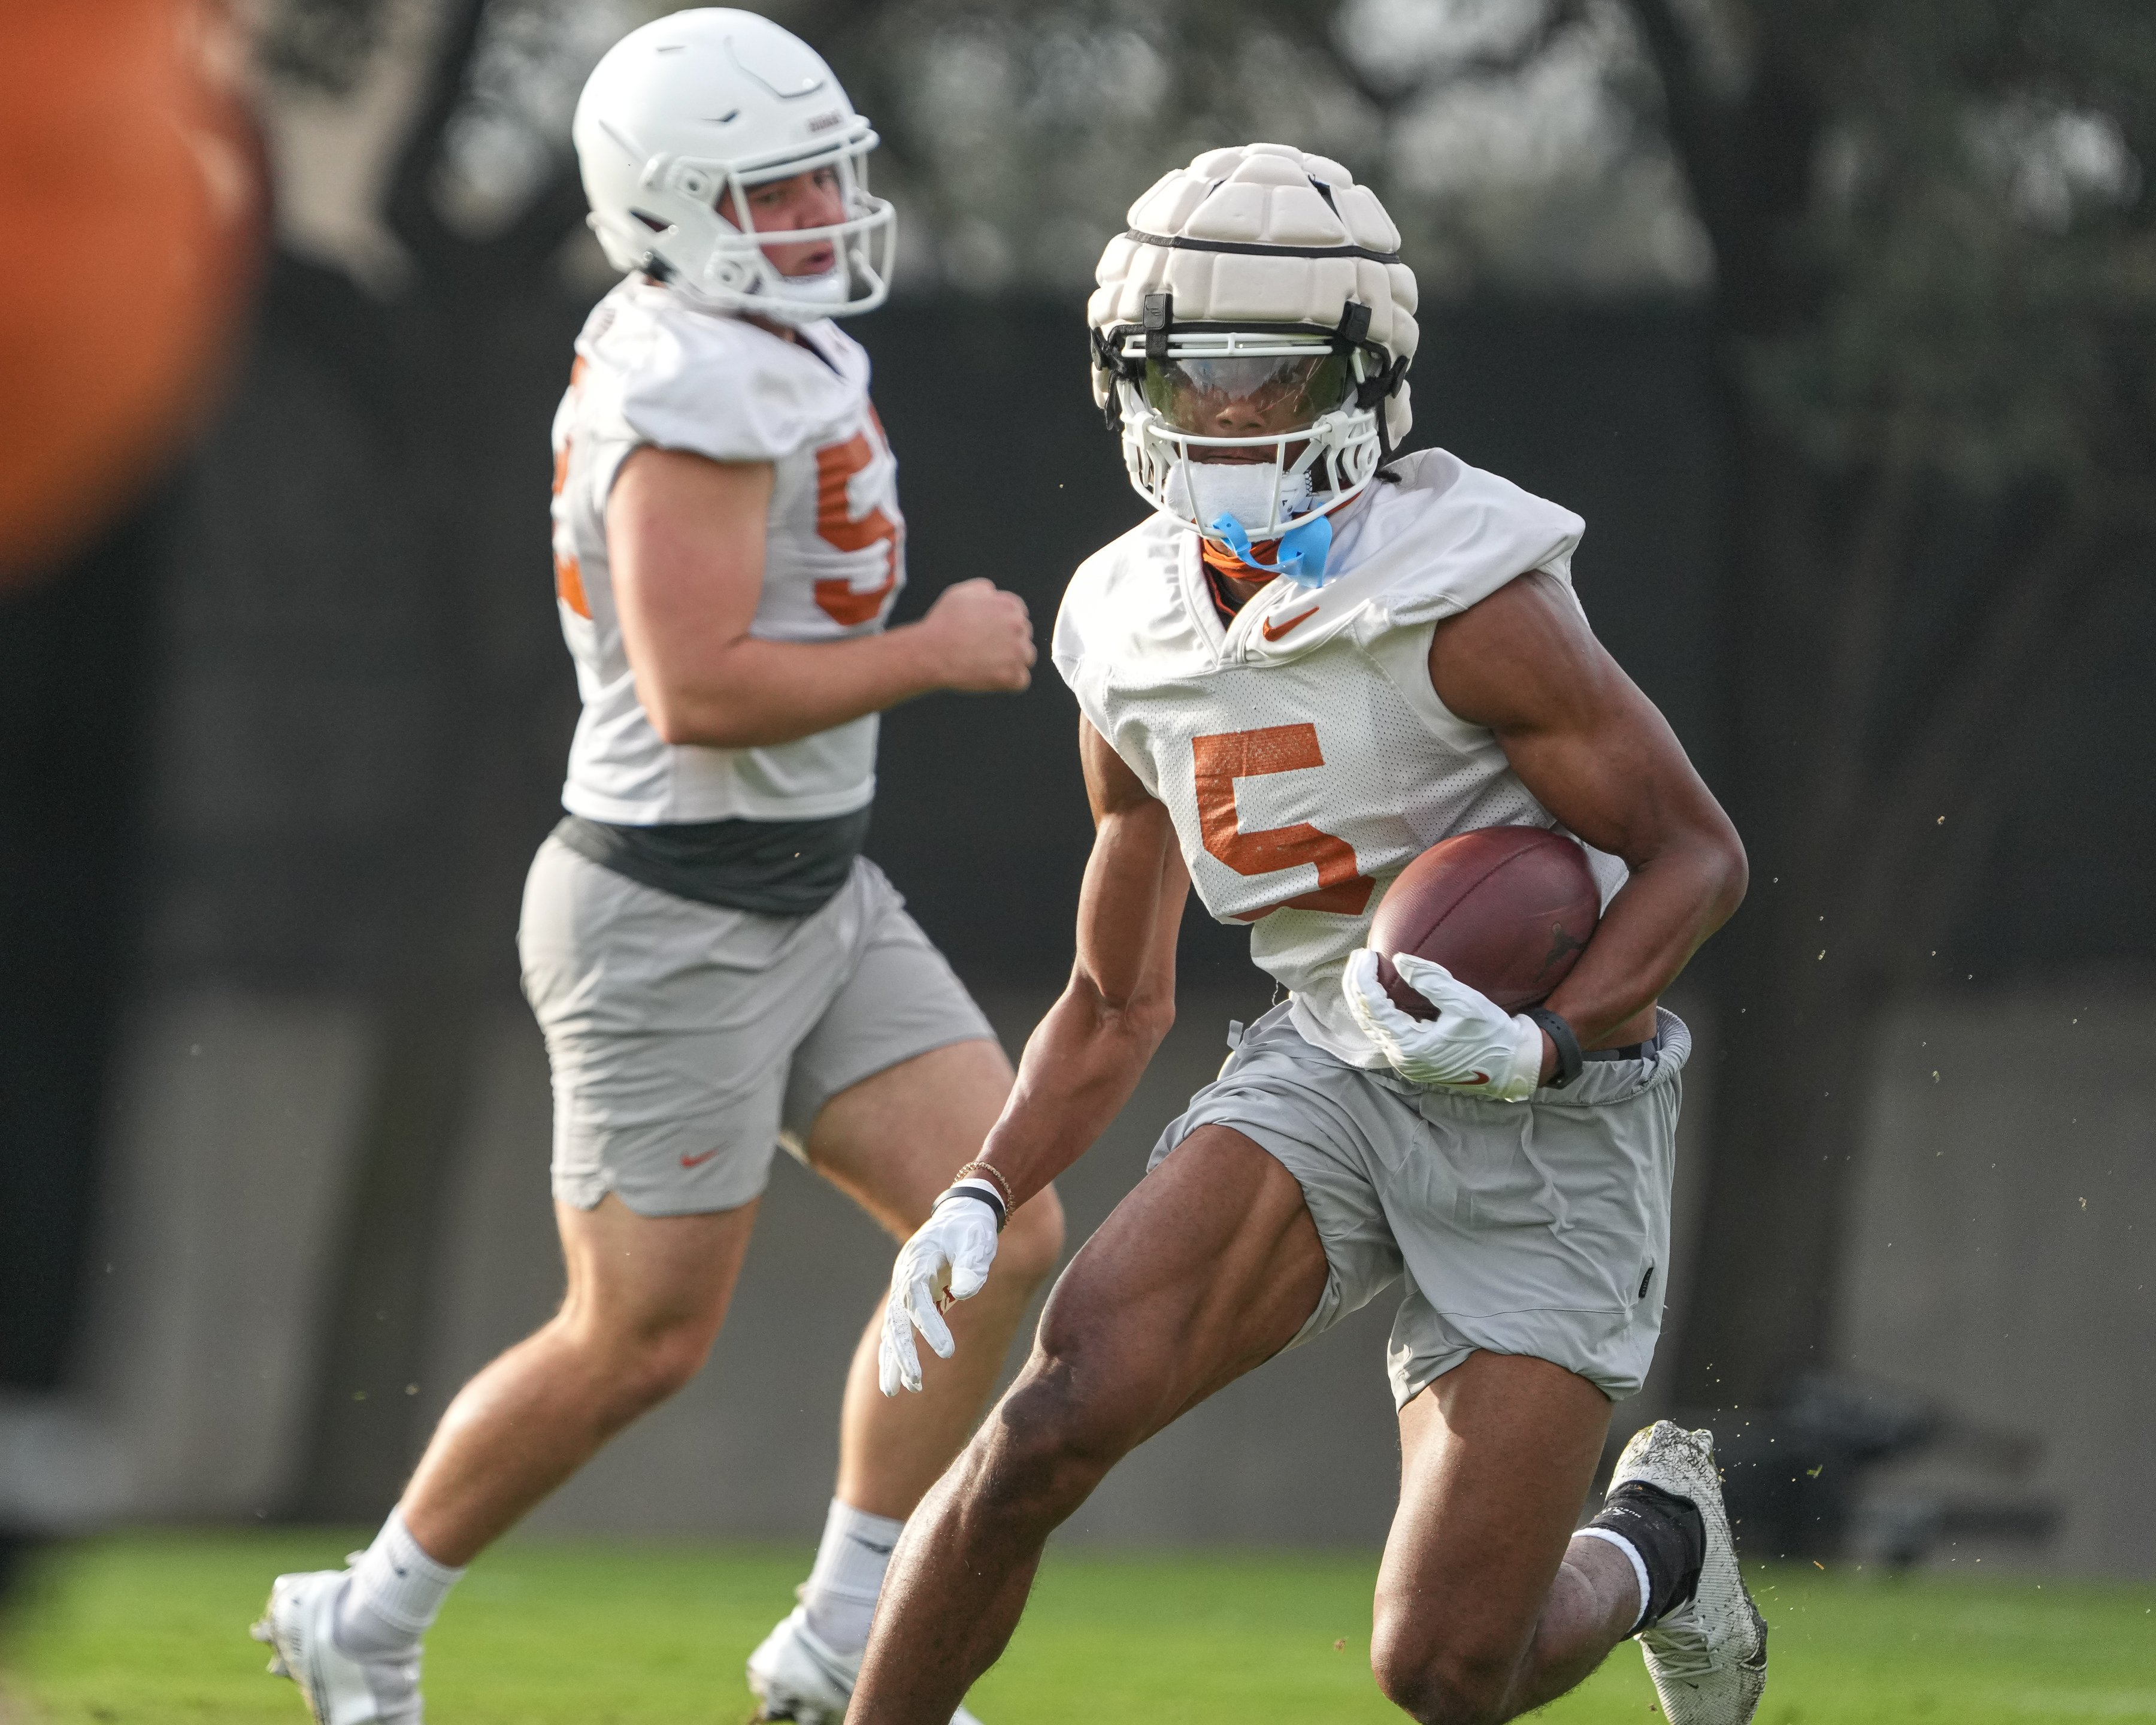 Who stood out on the Texas football team this spring?